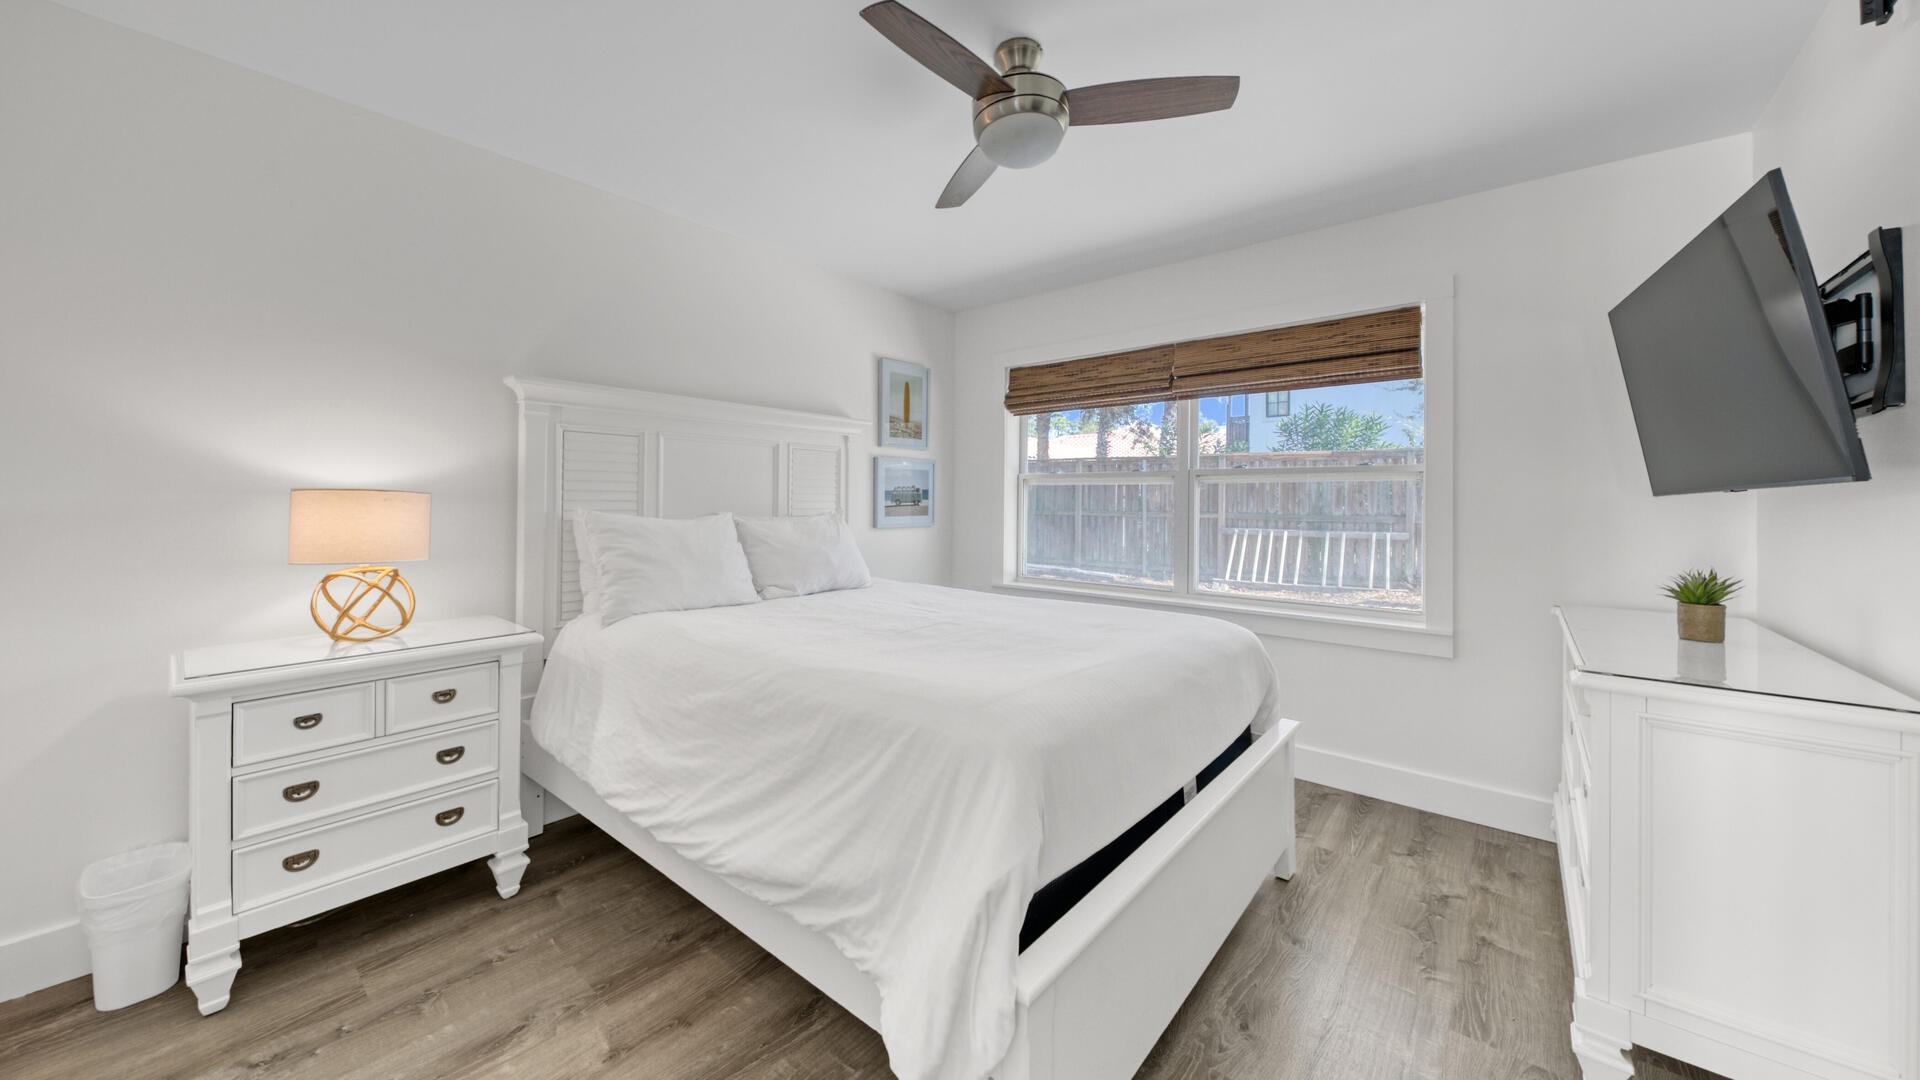 The 2nd bedroom offers a queen size bed and walk-in closet!